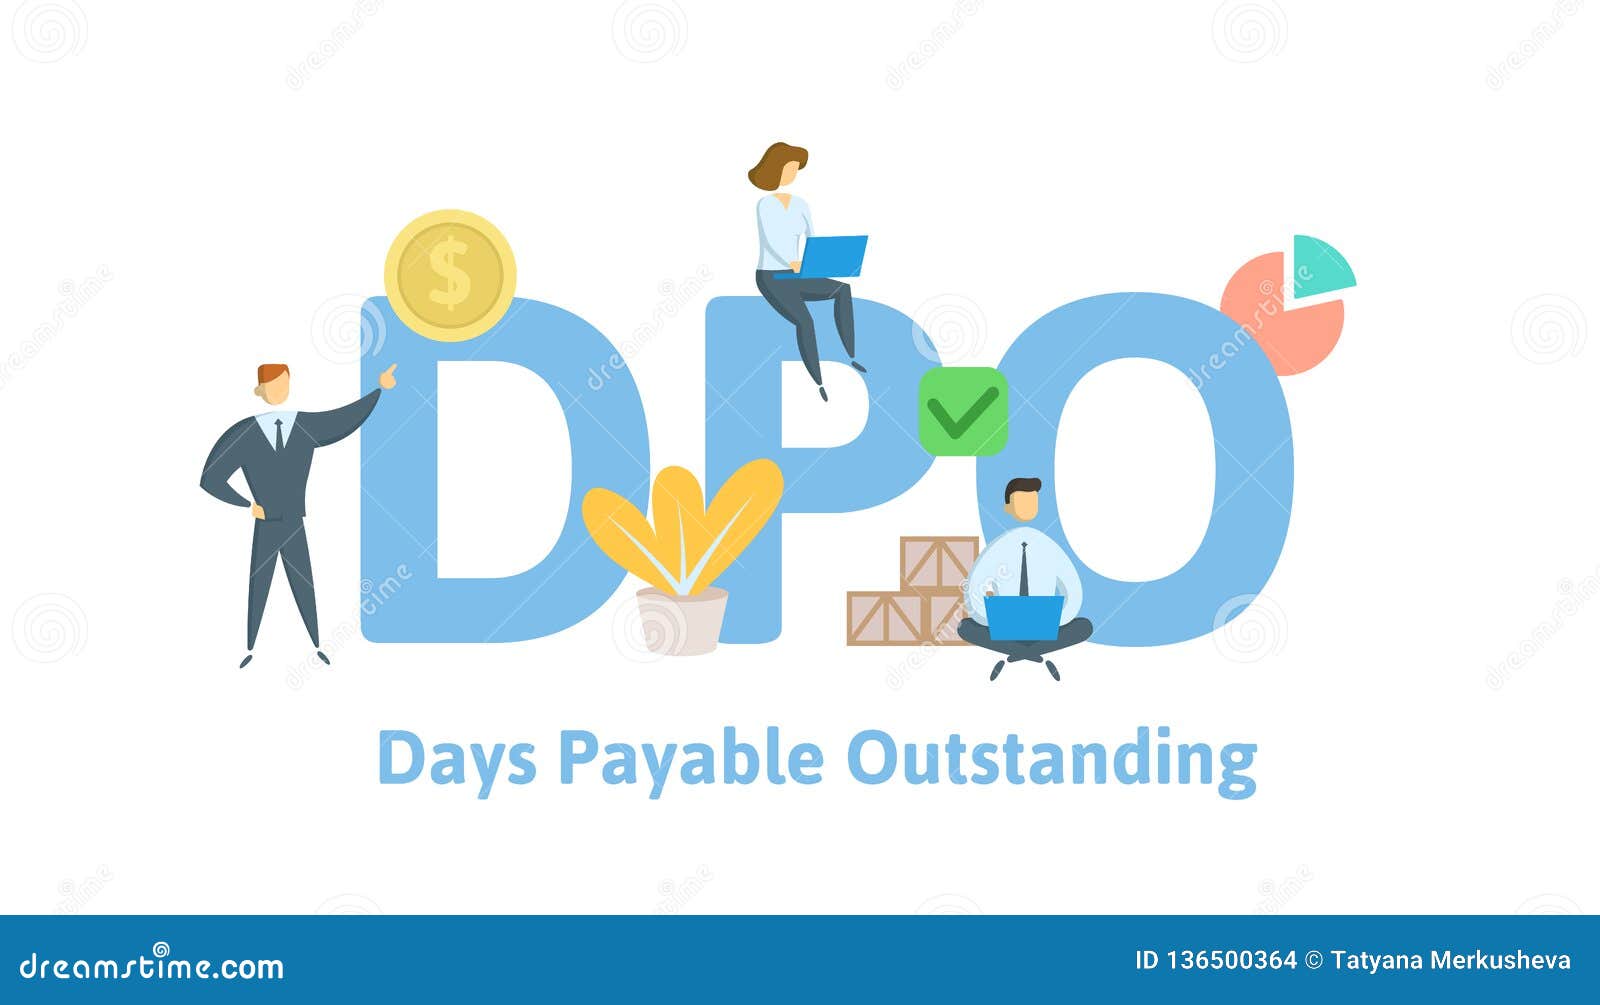 dpo, days payable outstanding. concept with keywords, letters and icons. flat  .  on white